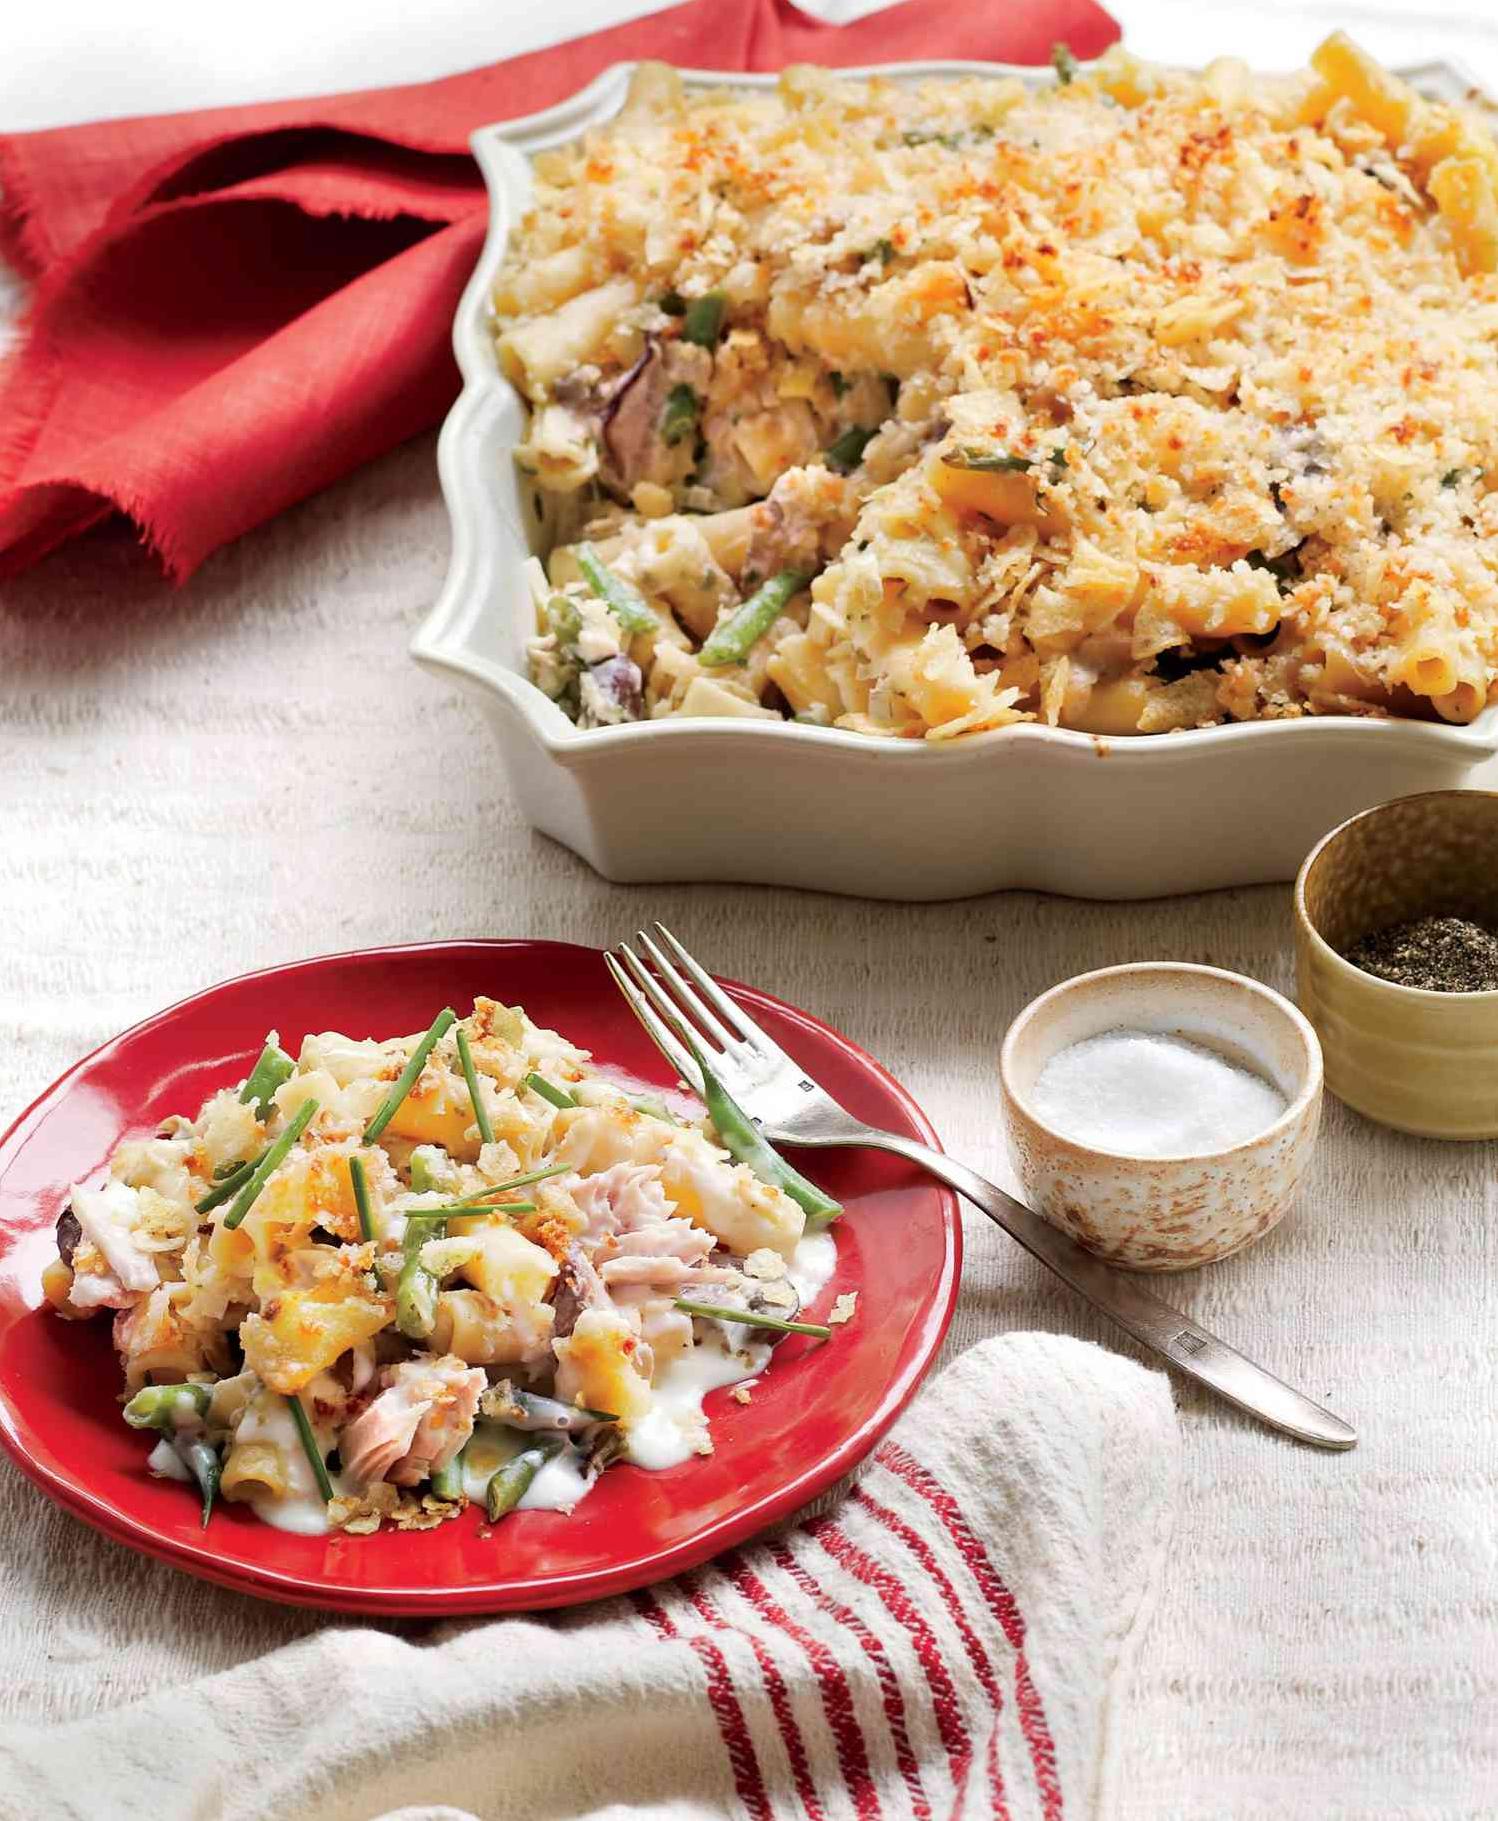  The tuna casserole, a Southern classic dish, is easy to make and delicious to share.